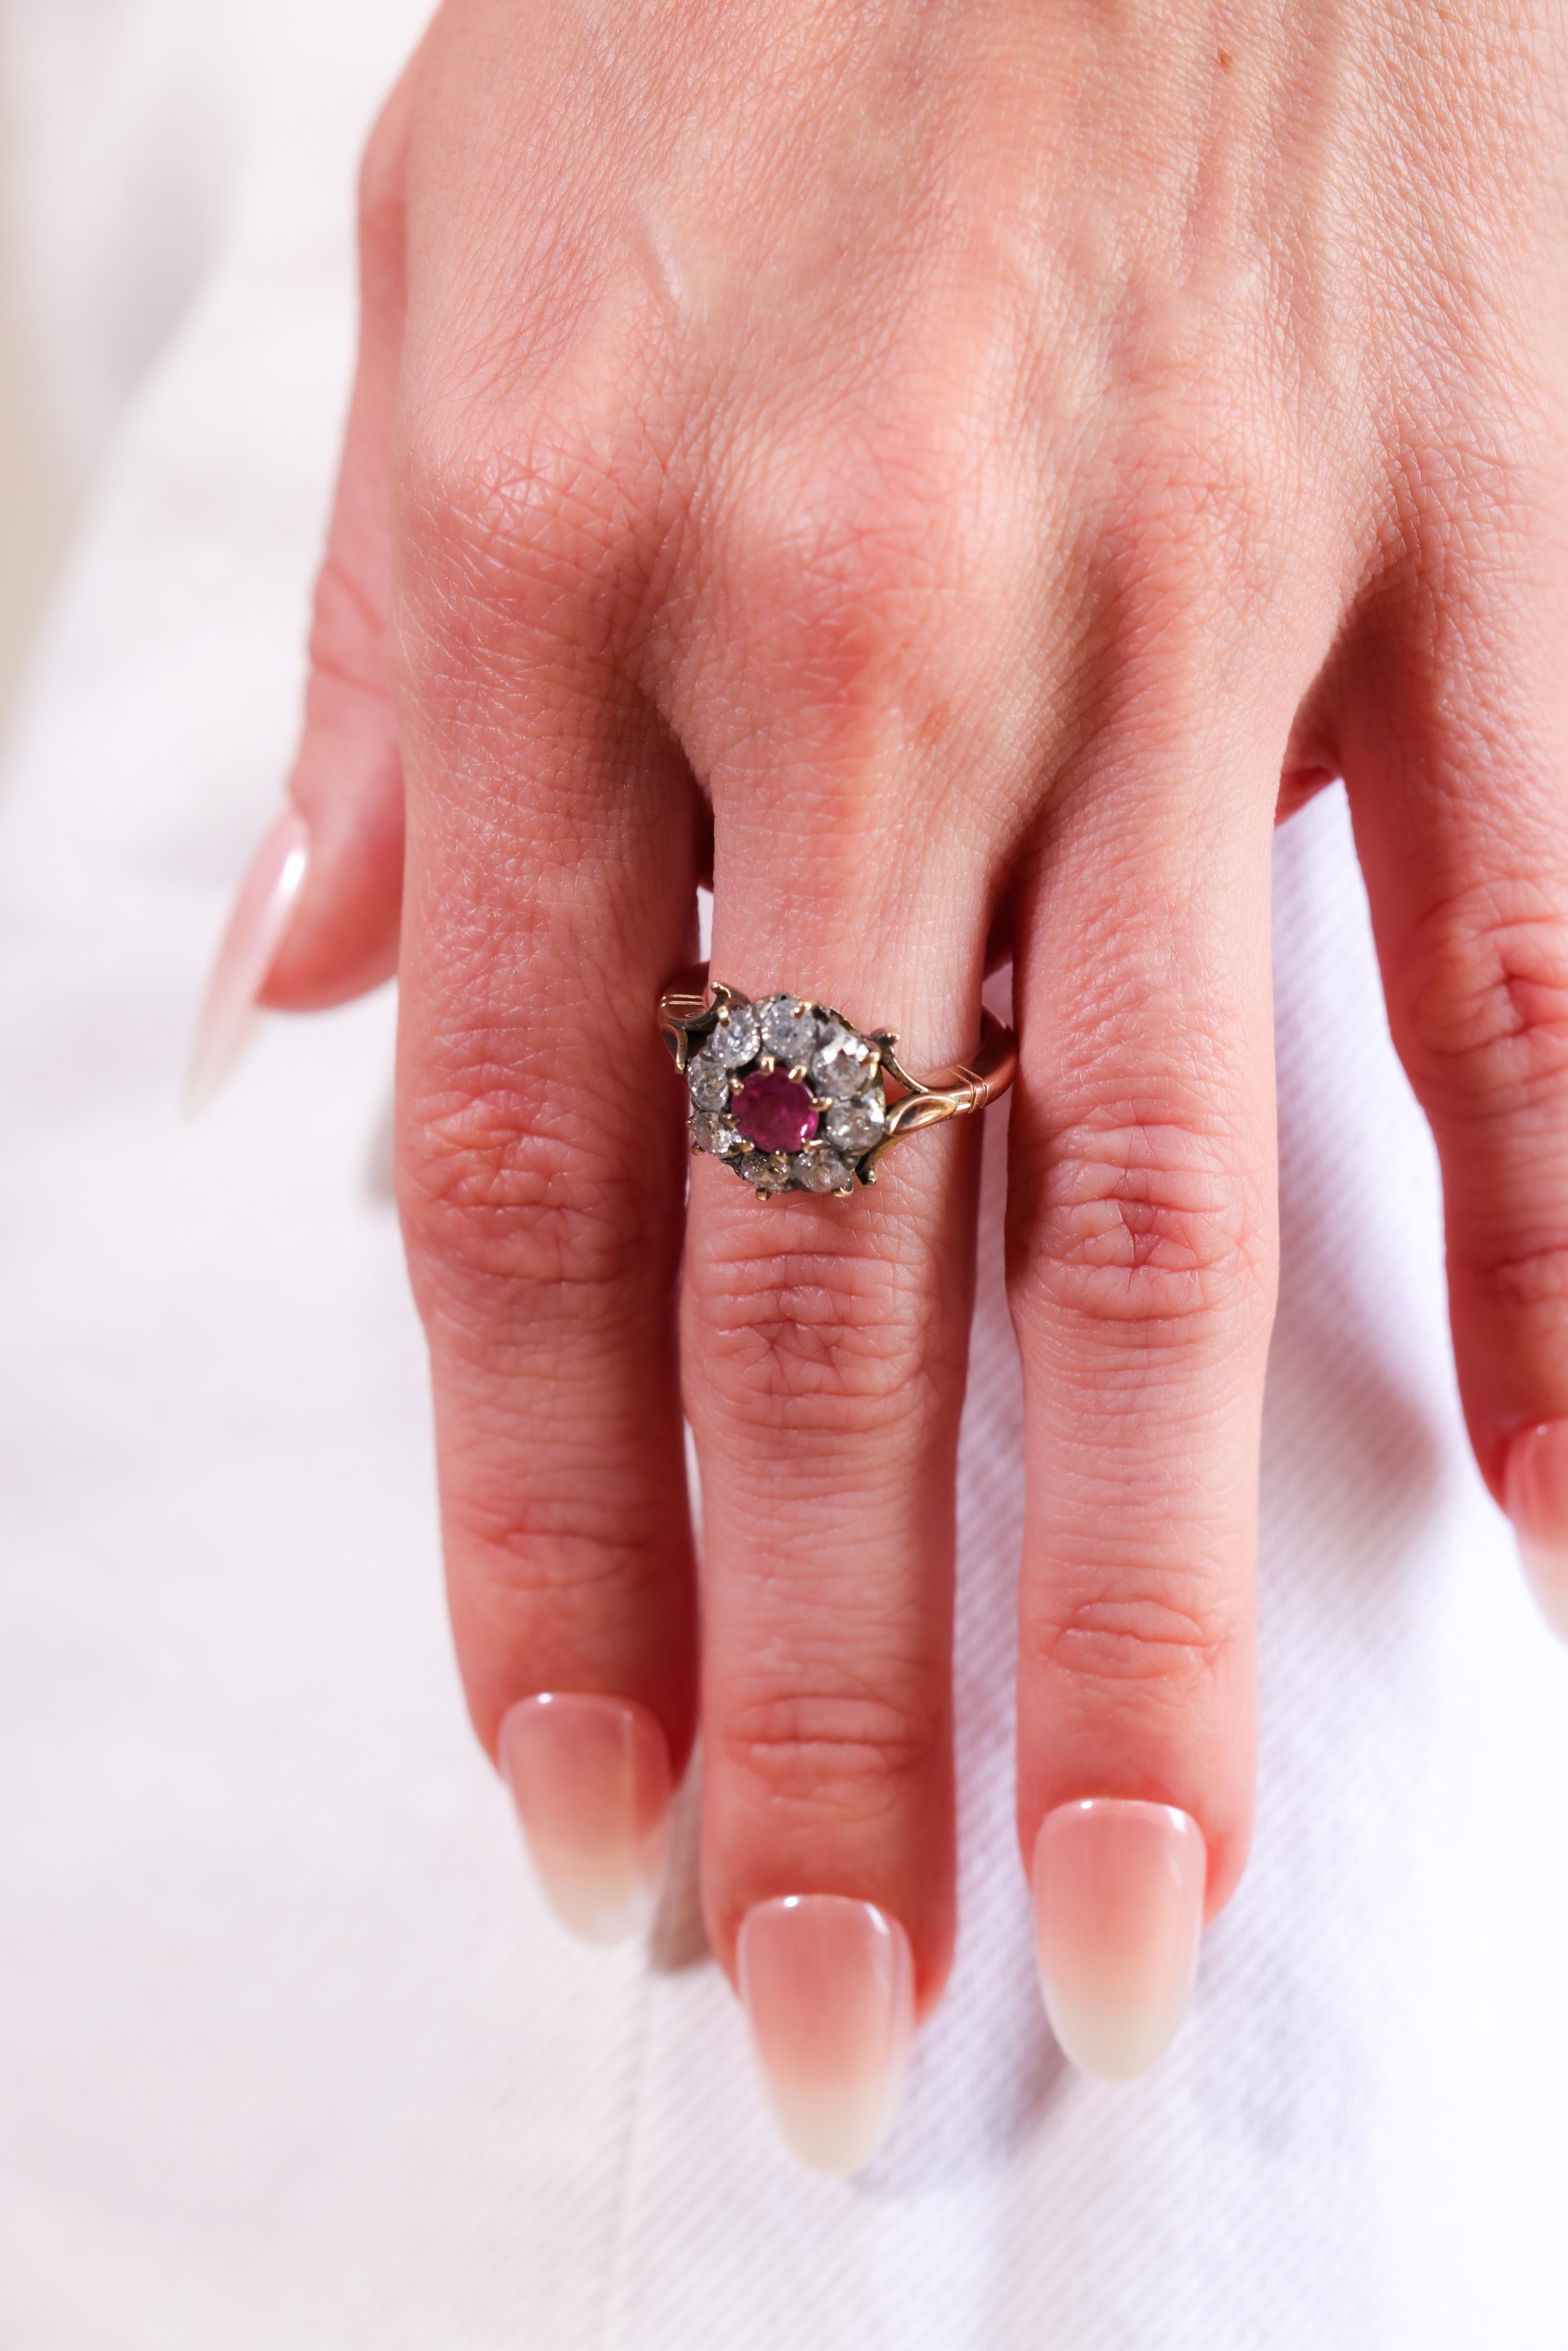 A spectacular and authentic Victorian era (circa 1890) yellow gold ruby and diamond halo ring. The Round Mixed Cut center ruby is a stunning pinkish-red hue and is gauged at approximately 0.55 carat. Further decorated with a halo of eight Old Mine